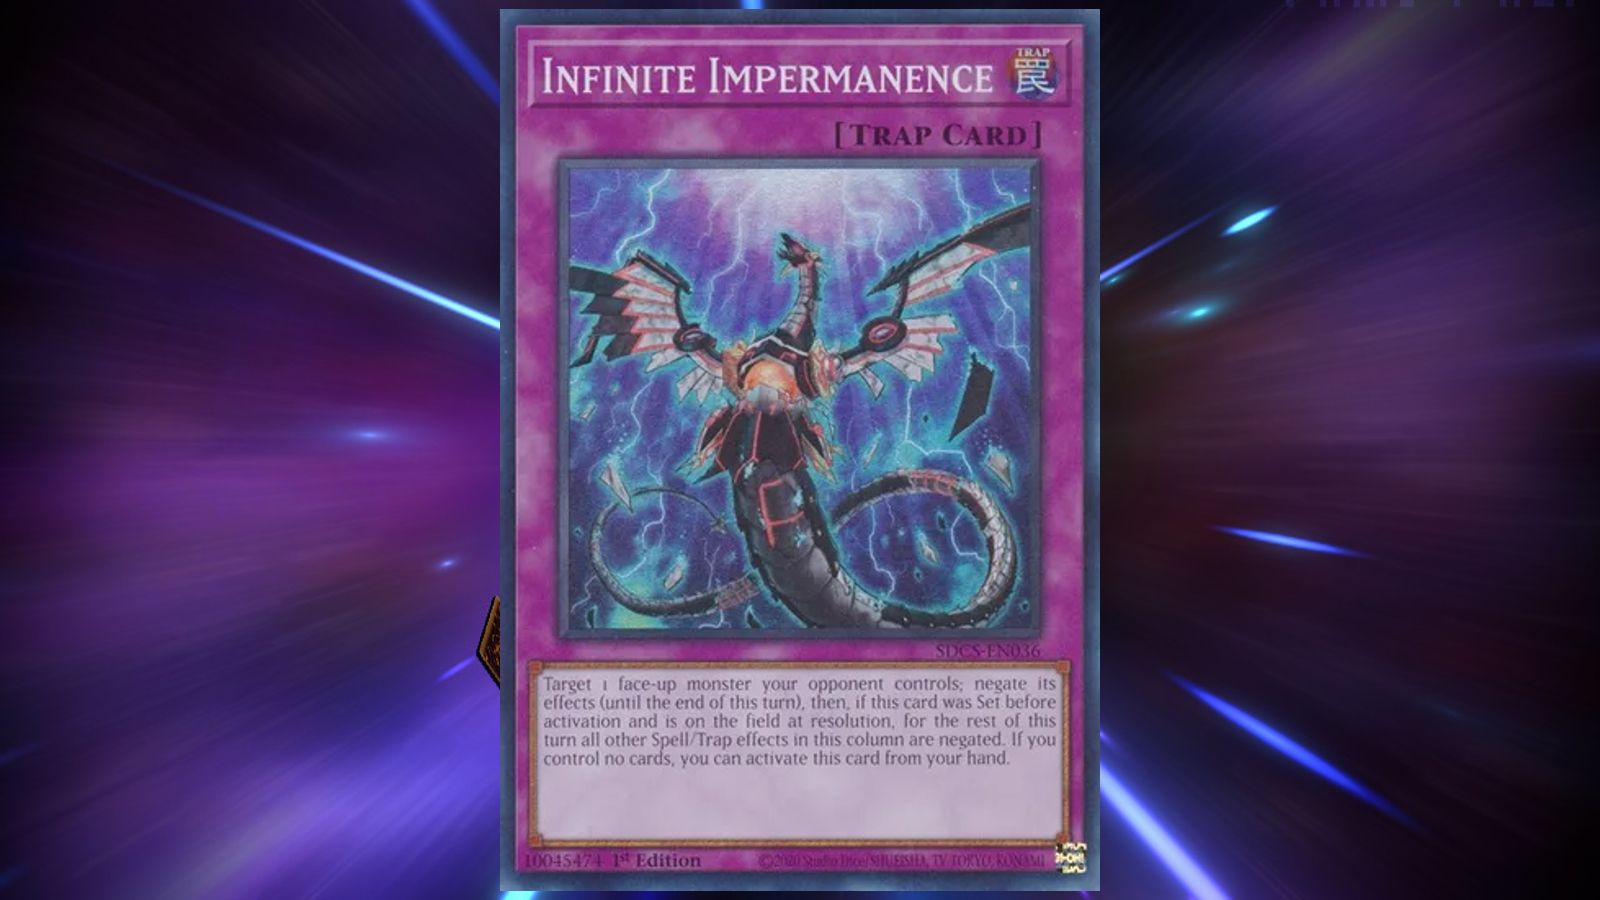 Yu-Gi-Oh! Master Duel players should craft Infinite Impermanence first.